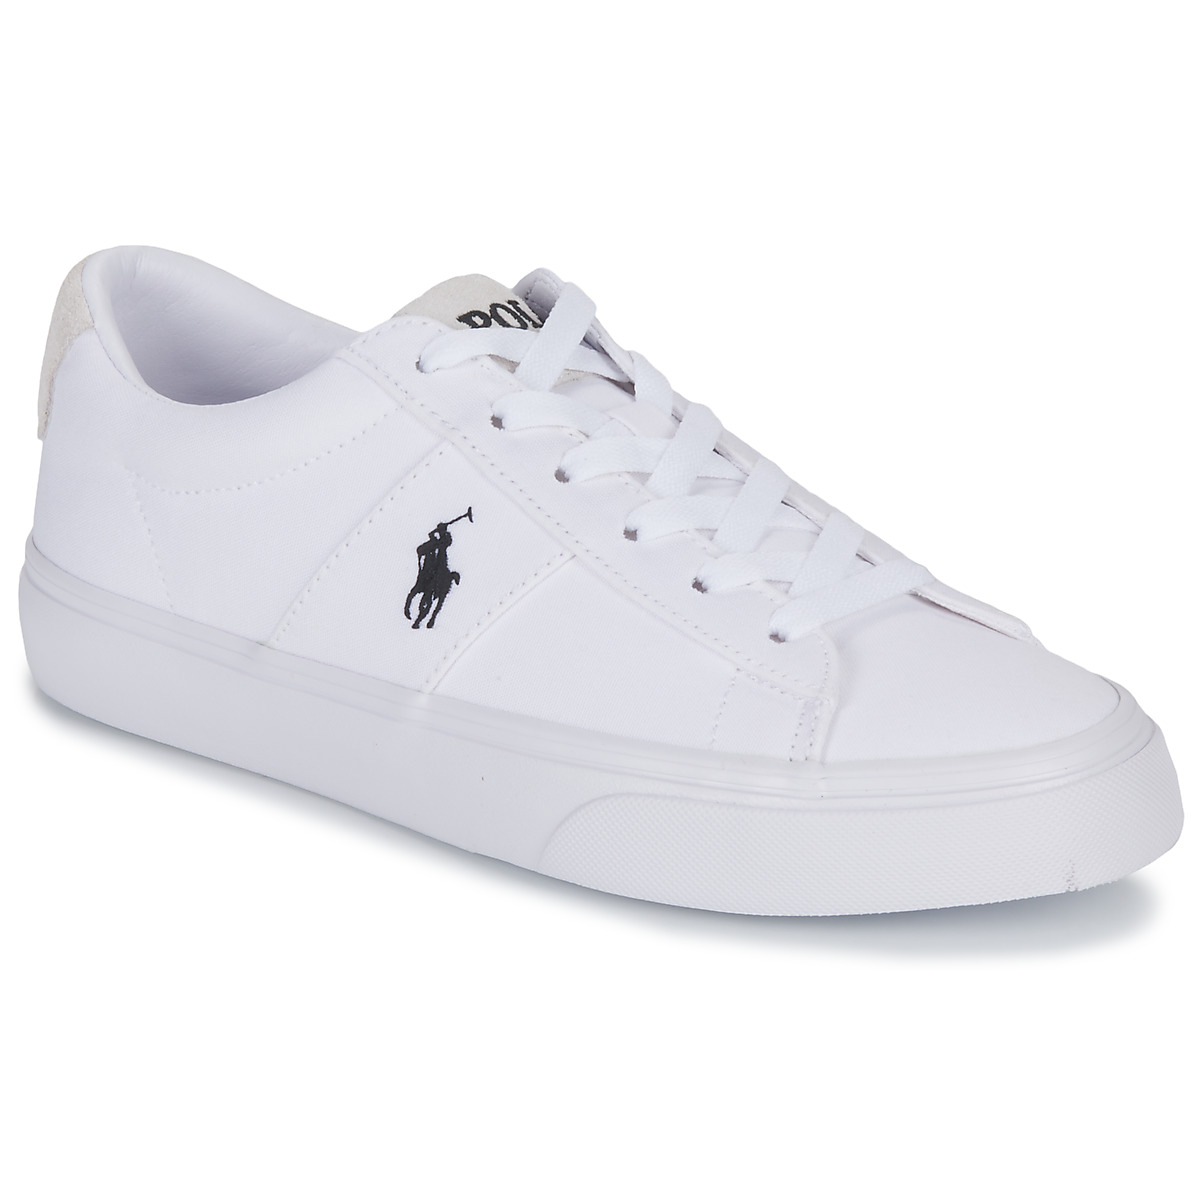 Classify Incident, event To block Polo Ralph Lauren SAYER-SNEAKERS-LOW TOP LACE White / Black - Free delivery  | Spartoo NET ! - Shoes Low top trainers USD/$106.00